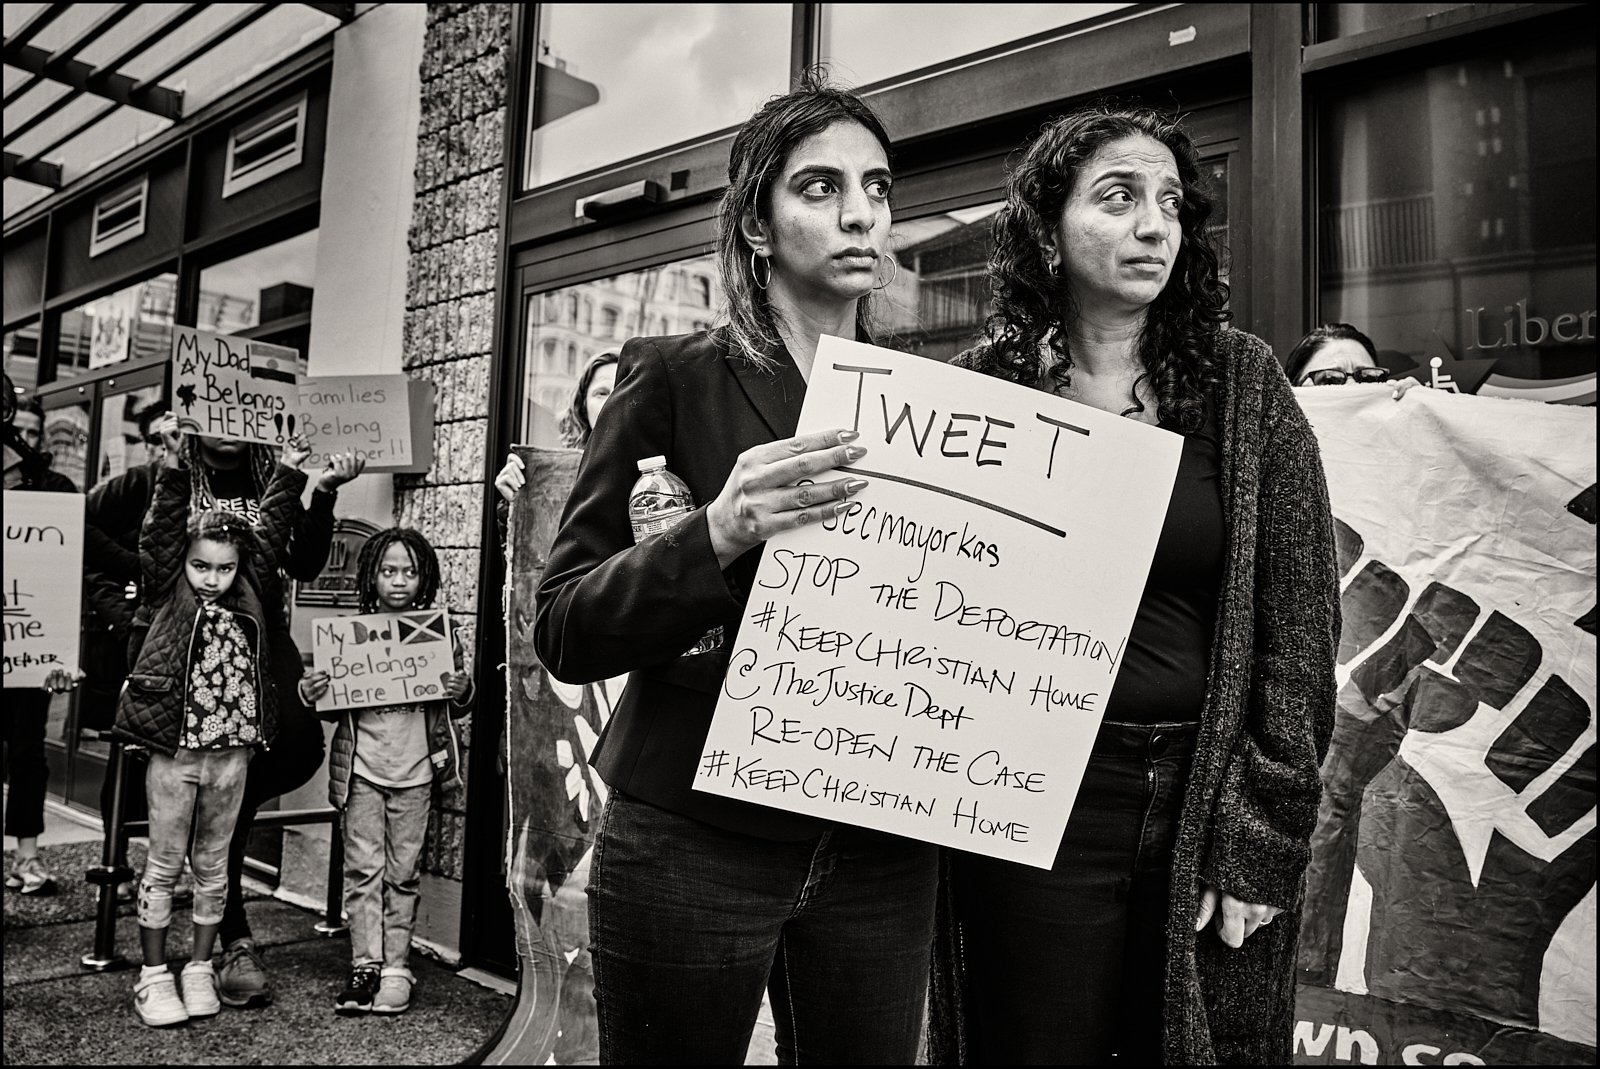  Sheila Maddali supports Sarika Kumar M’Bagoyi (right) during the rally at the ICE office in Philadelphia.  Sarika’s two daughters stand in the background. 